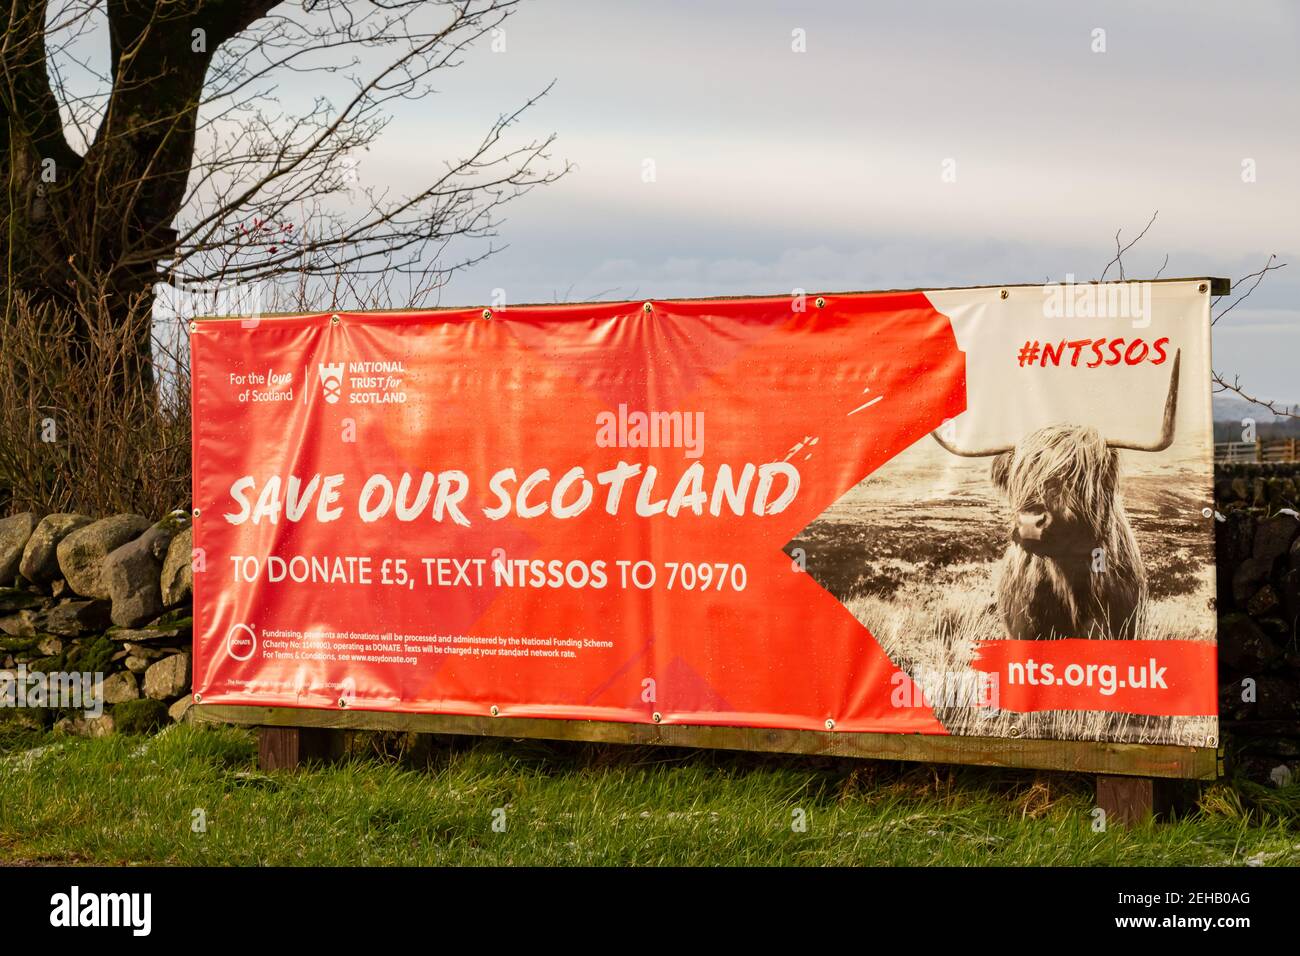 Castle Douglas, Scotland - 27th December 2020: Close up of the Save our Scotland, National Trust for Scotland campaign banner at Threave Castle, Castl Stock Photo